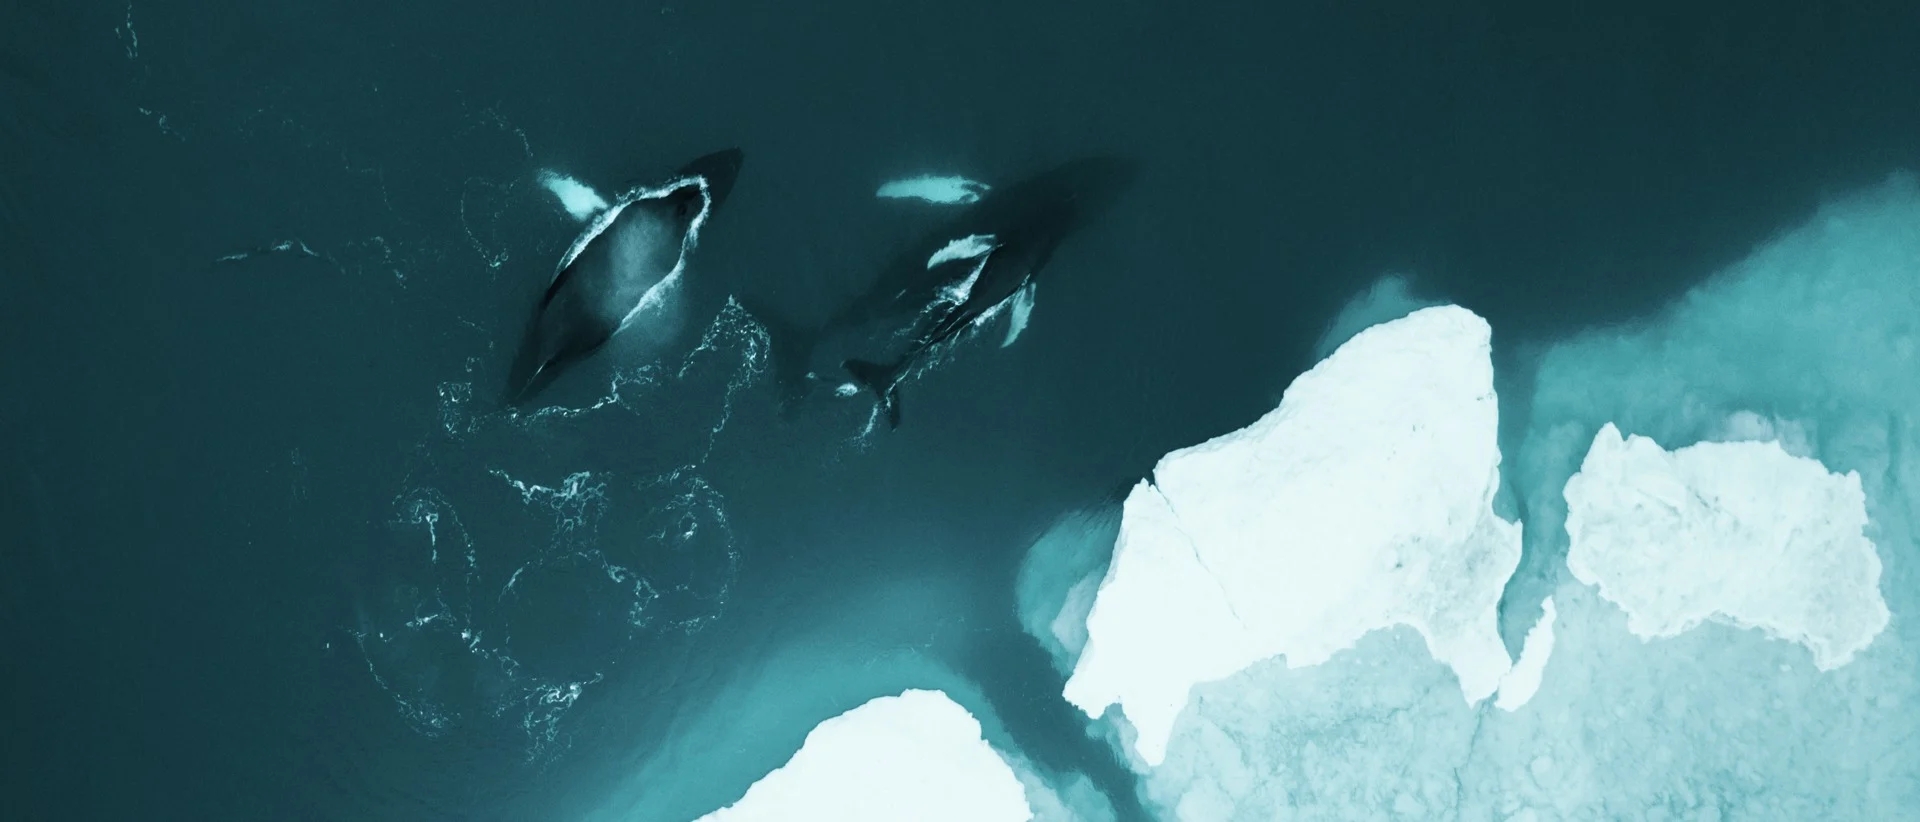 Whales swimming off the edge of an iceberg in Greenland. Photo: Stian Klo